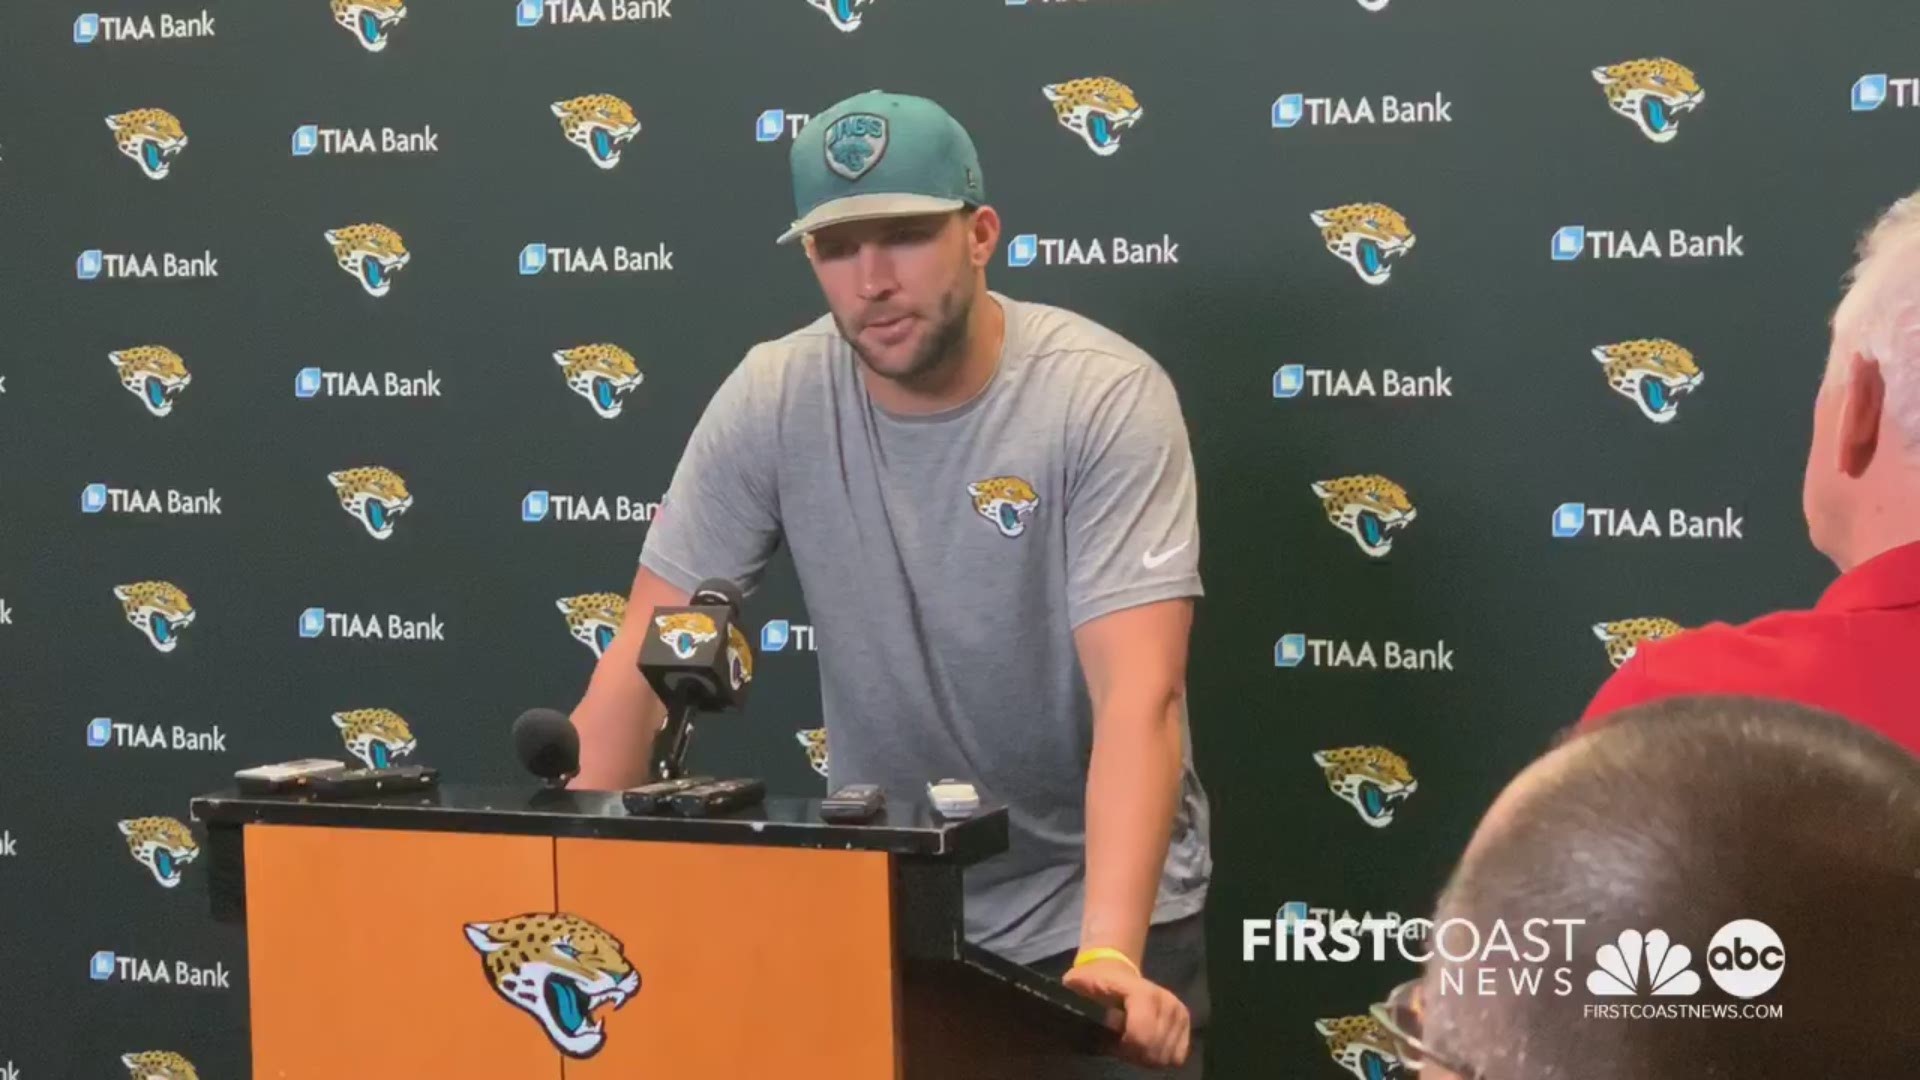 Blake Bortles discusses the Jaguars upcoming game against the Houston Texans.